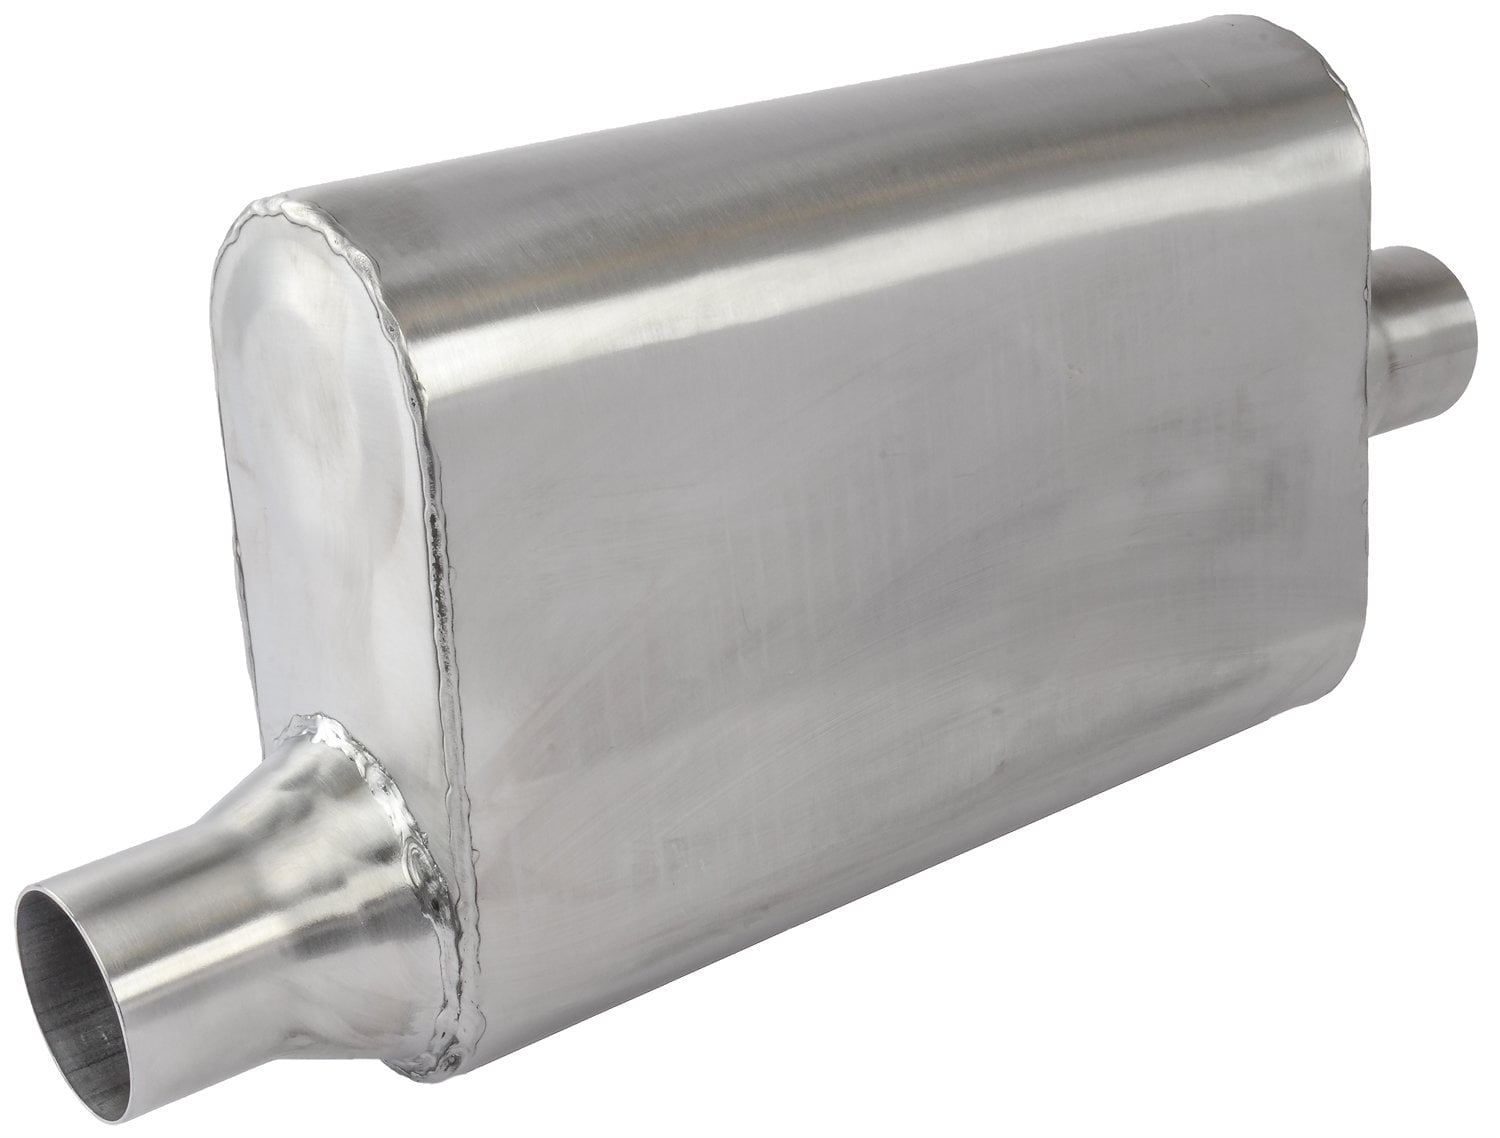 2.5” Dual Inlet/Dual Outlet Diameter JEGS Chambered Deep-Tone Muffler Overall Length Of 19” Stainless Steel Muffler Body: 9” Wide x 4” High x 13” Long